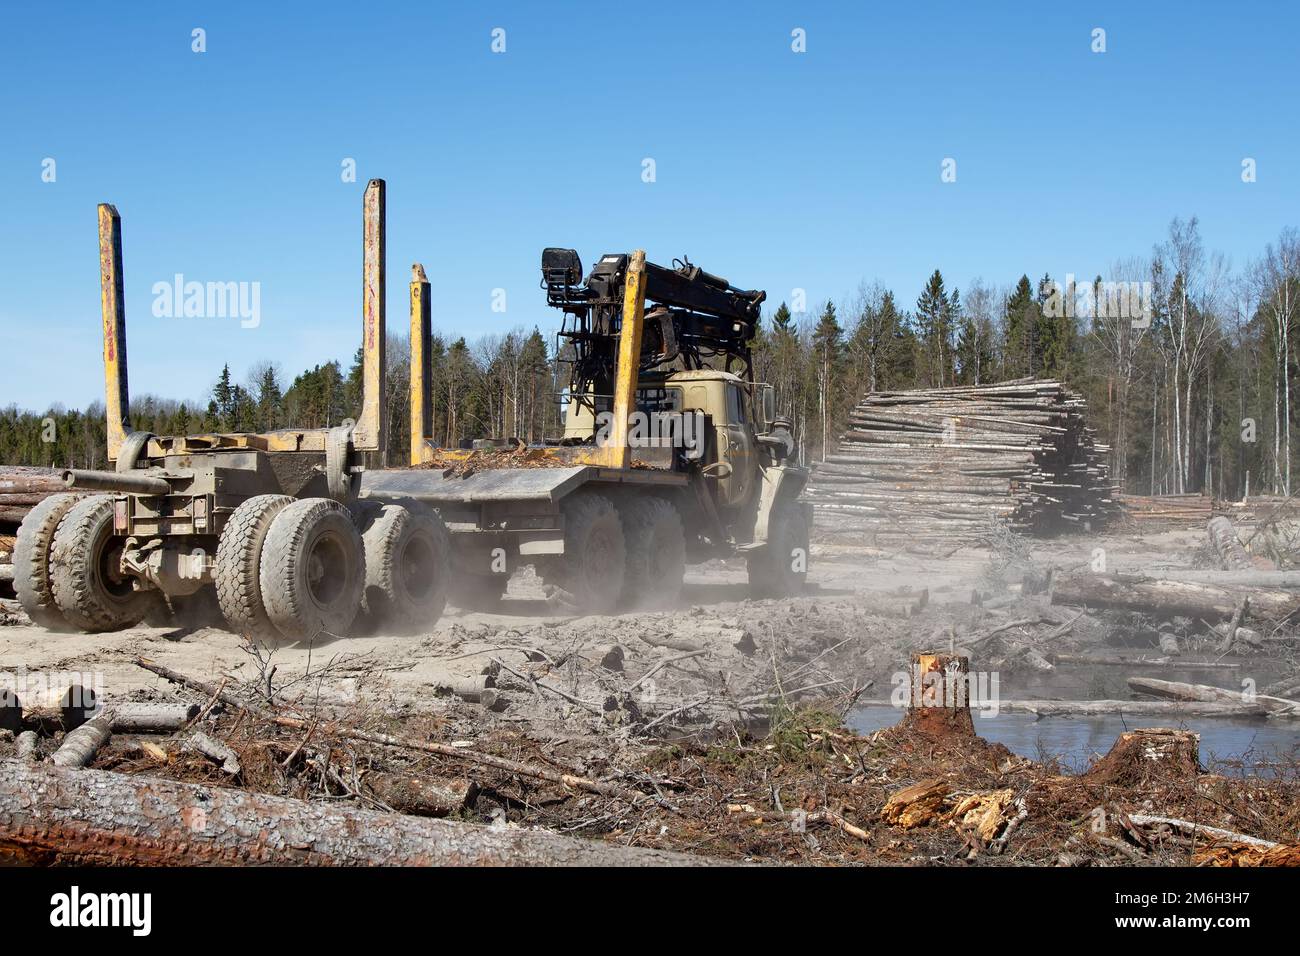 Operations for loading a logging truck Stock Photo